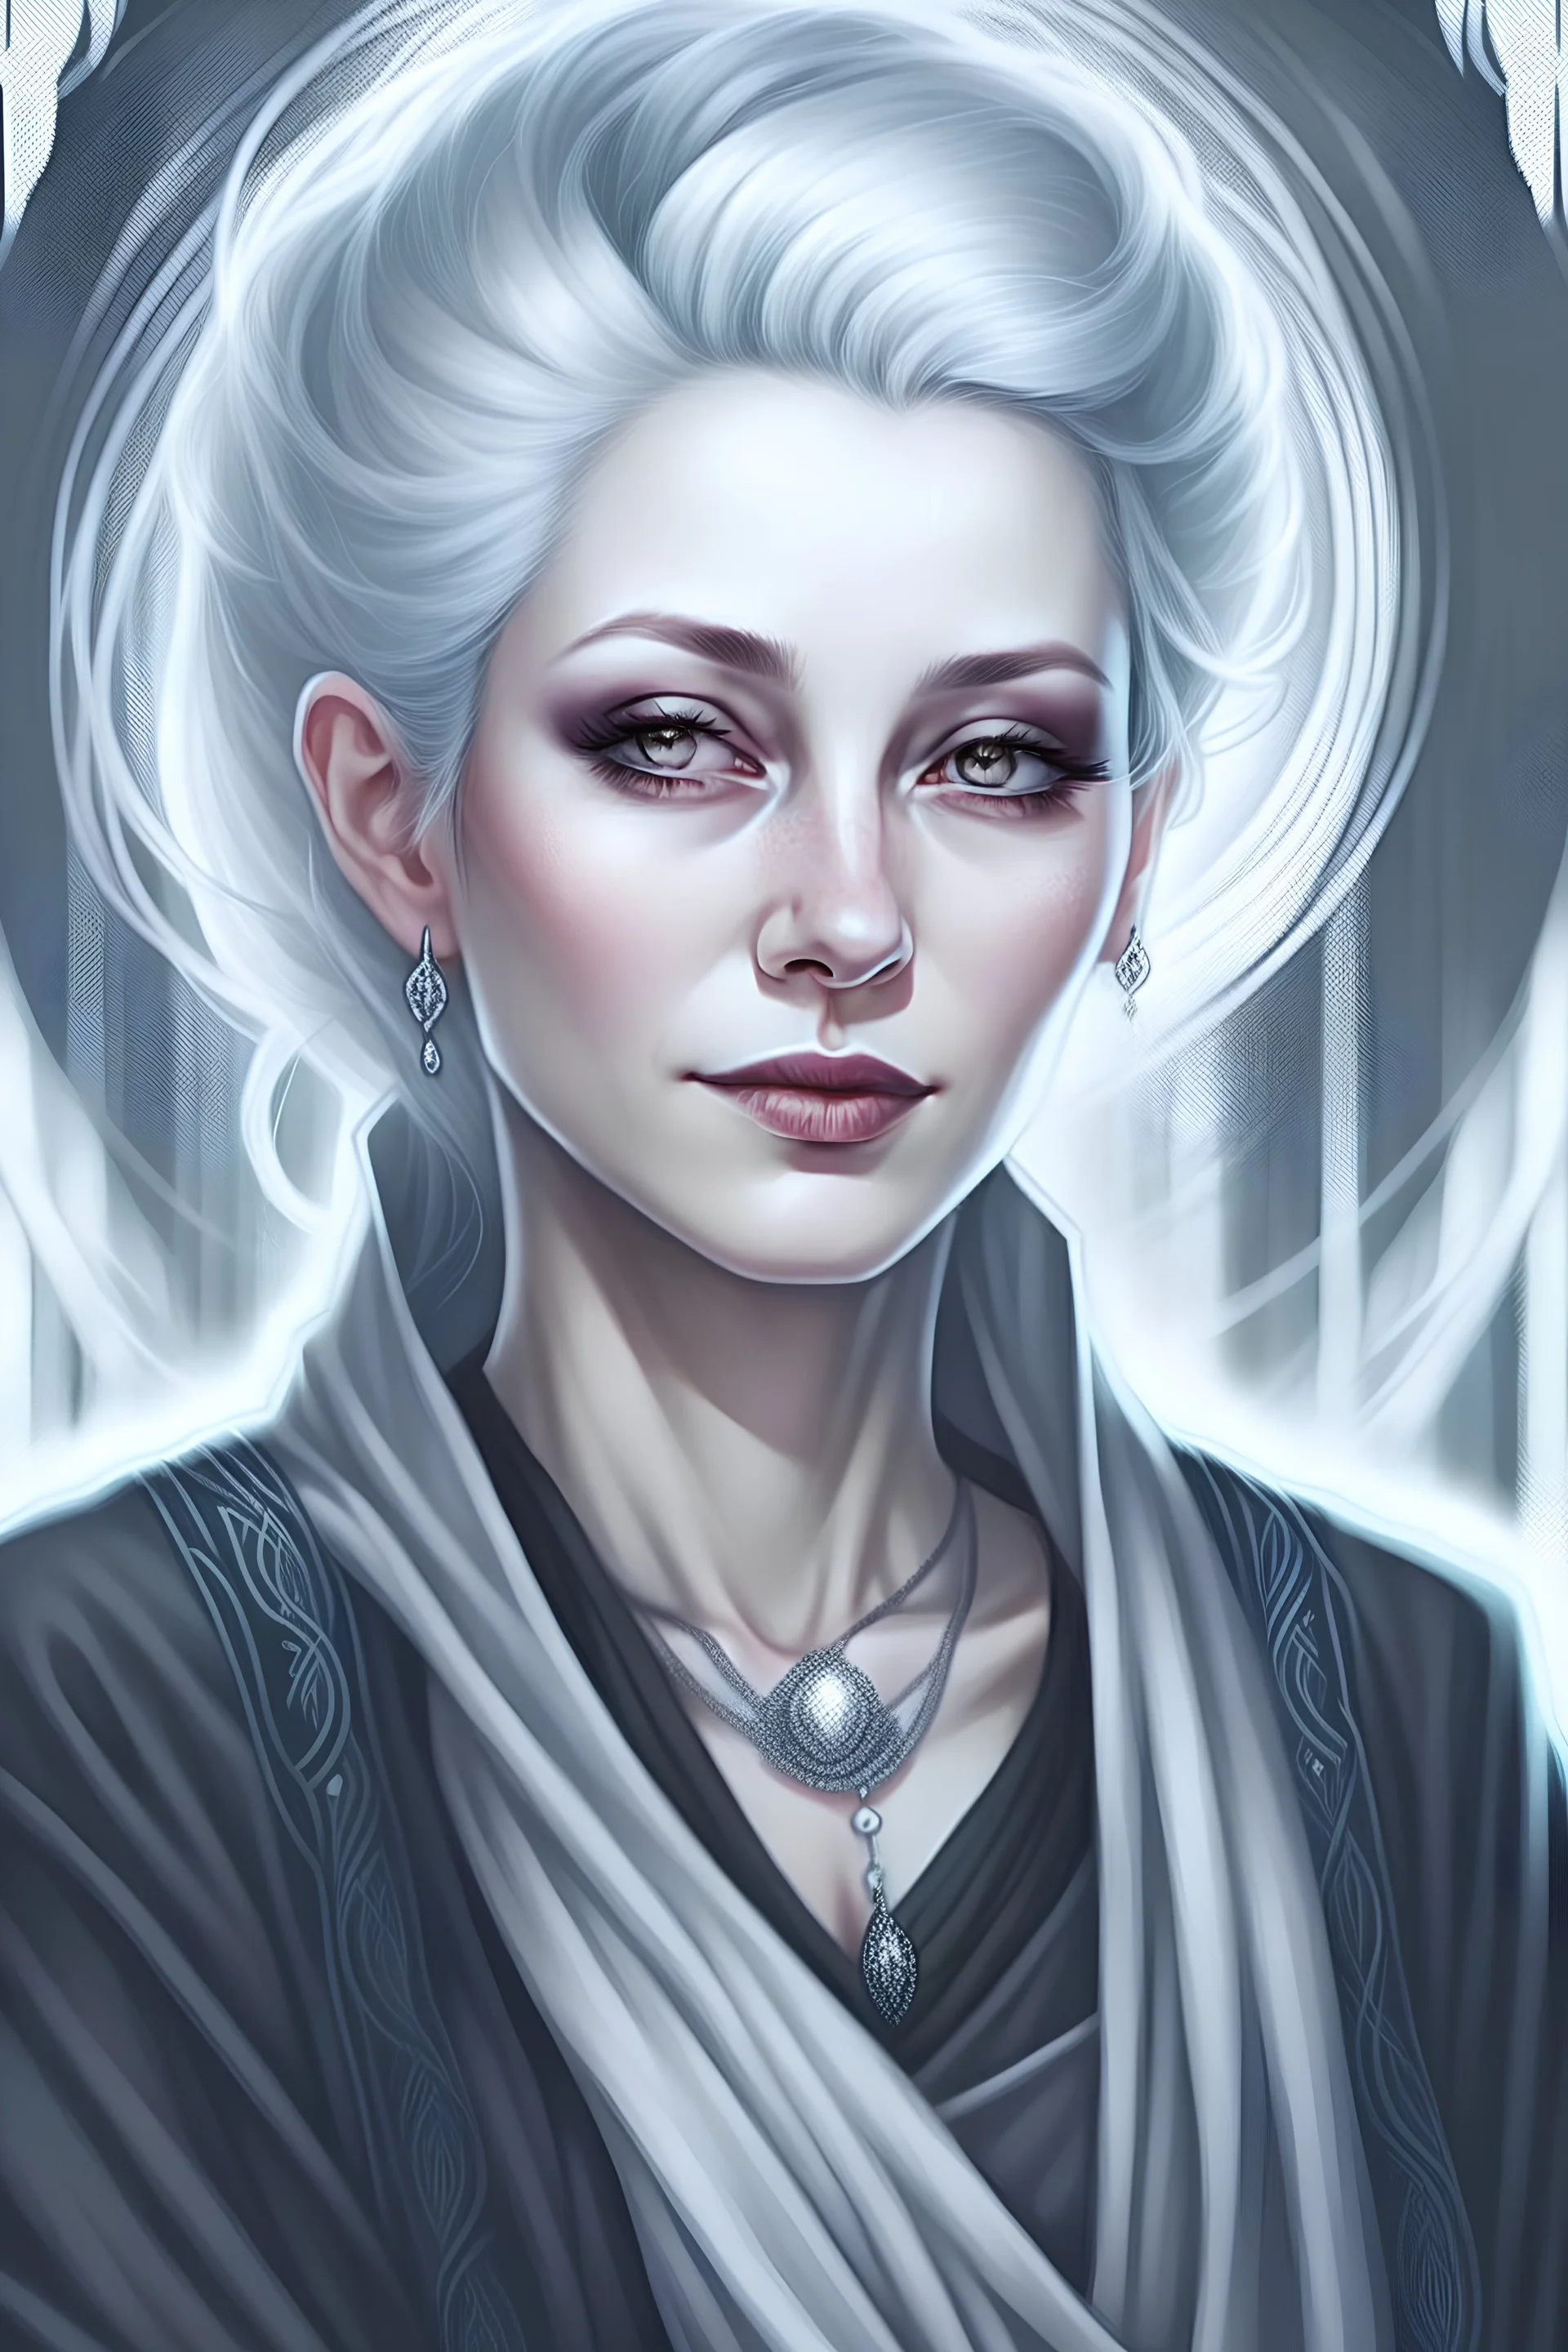 Hyper-realistic, highly detailed portrait inspired by Yoshitaka Amano and Artgerm. Elven woman with elongated ears, light grey hair styled in a bun, and light grey eyes. Chalky white skin emphasized. Focus on dark, fantasy attire: black scarf and robe, bare arms.